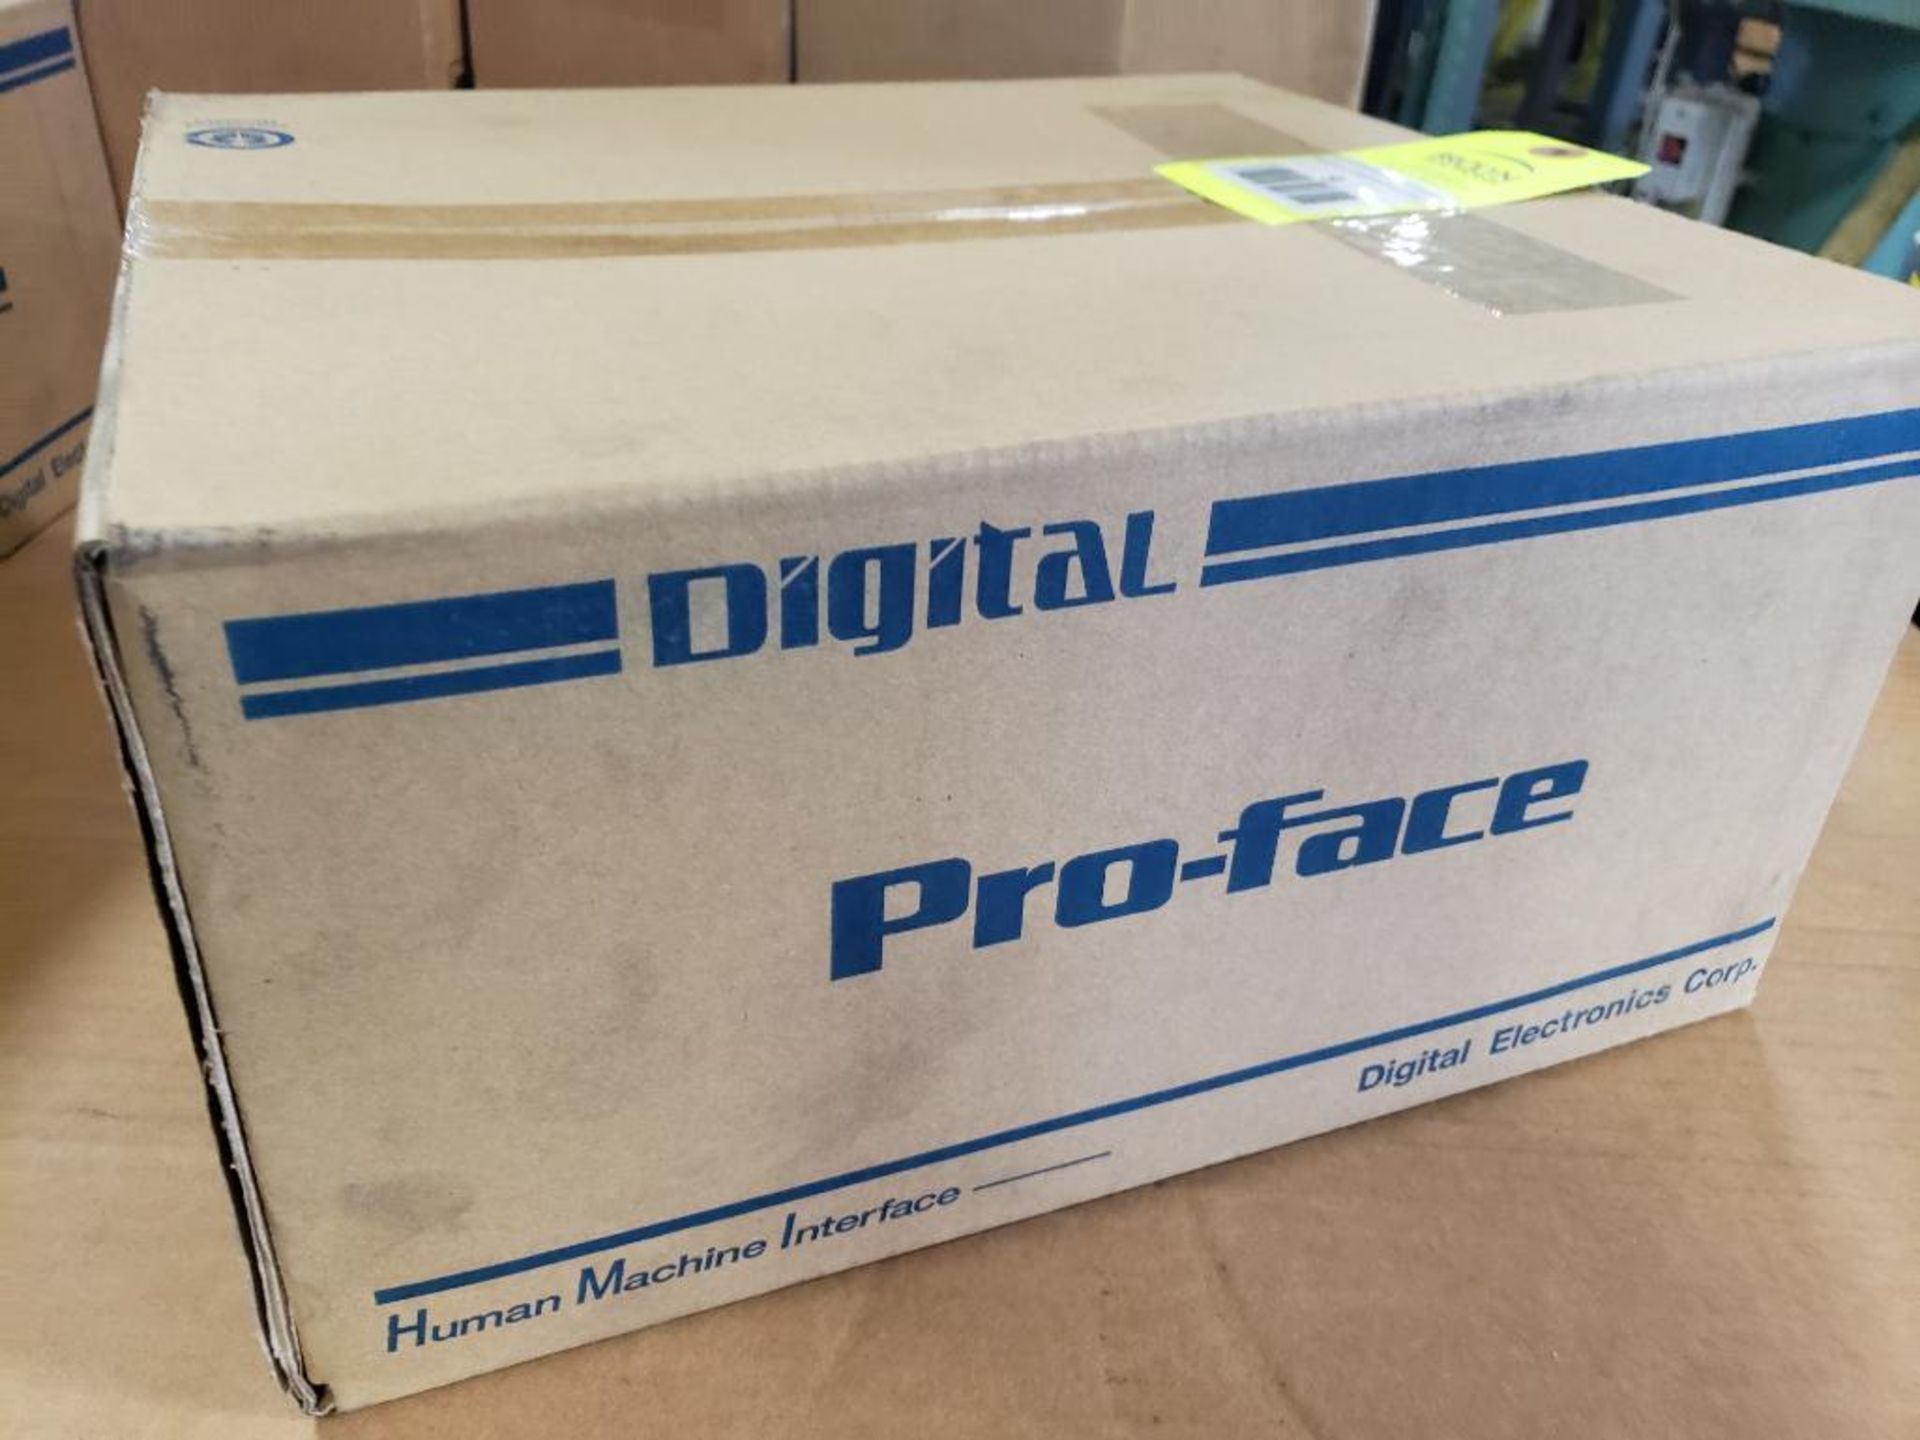 Digital Electronics Corp Pro-Face AGP3500-T1-D24 operator interface panel. New in box. - Image 4 of 6